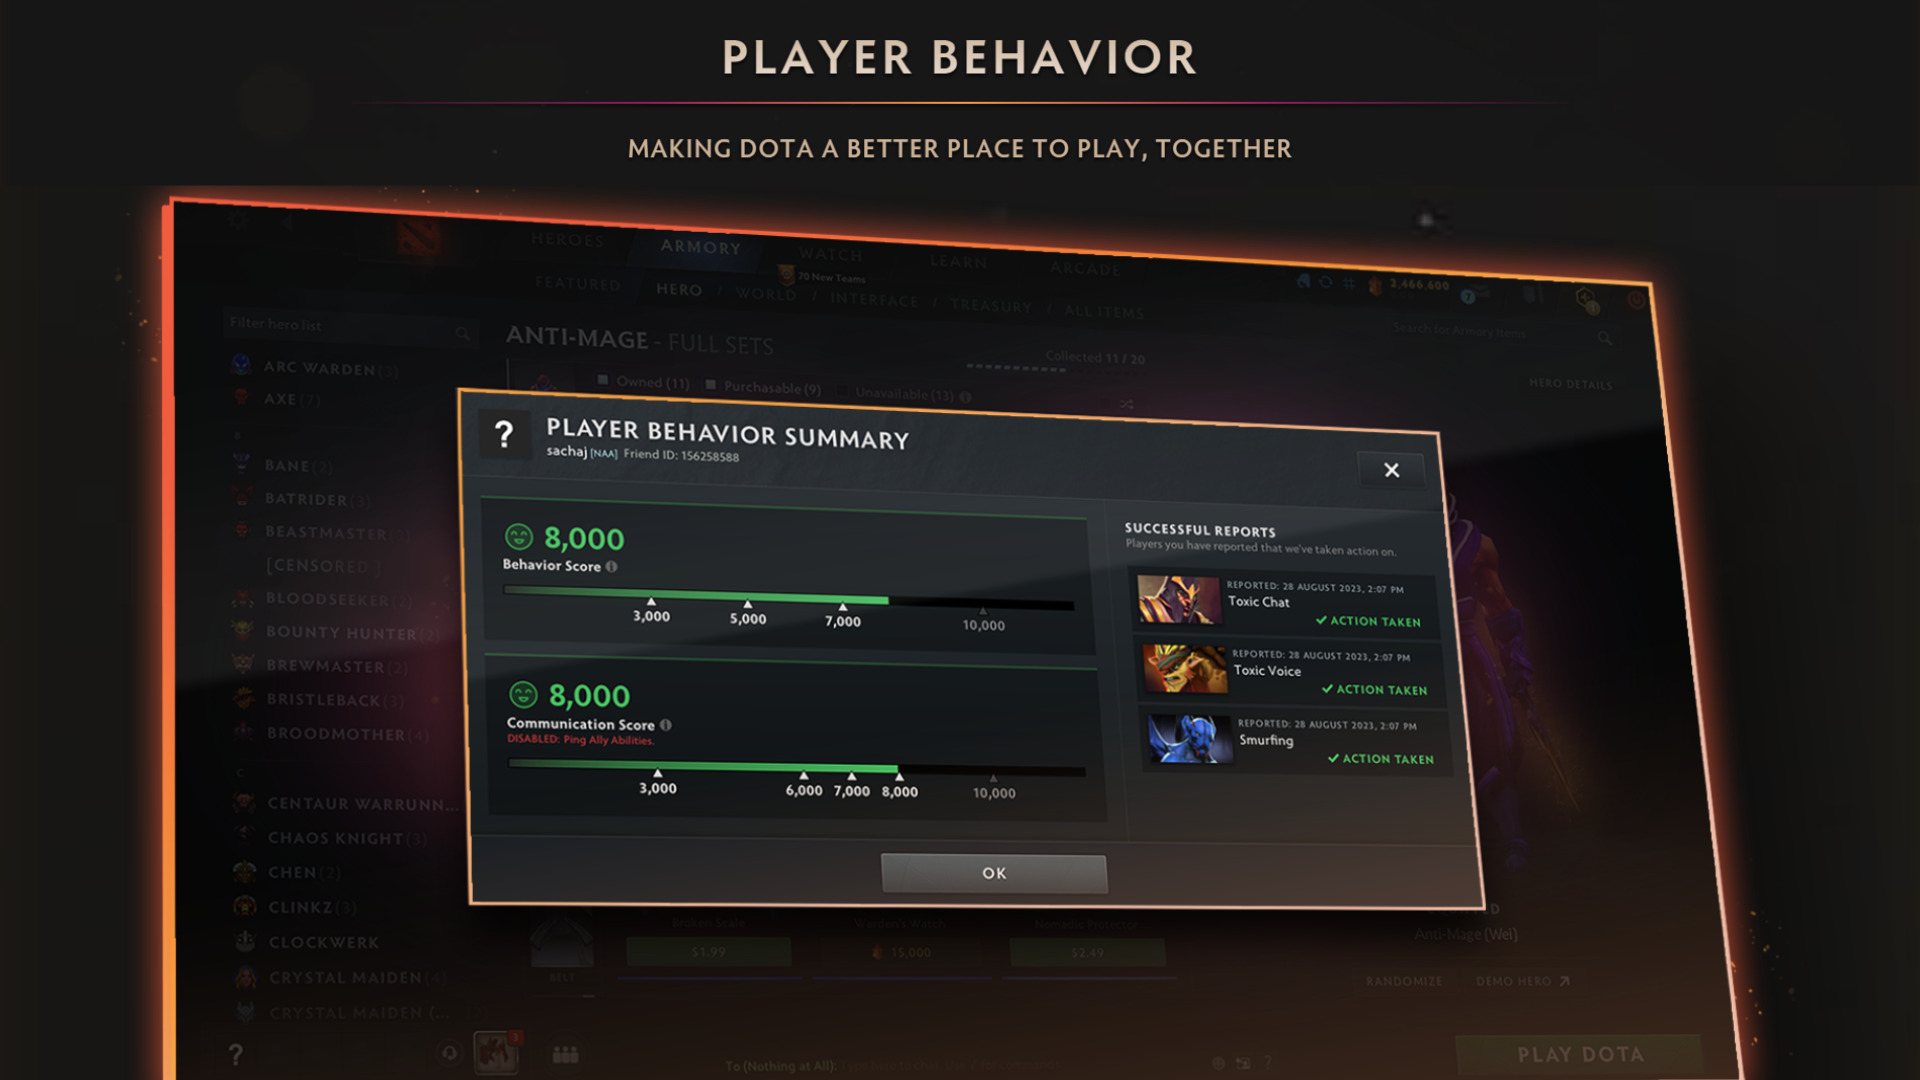 Valve has banned 90,000 Dota 2 smurf accounts. These accounts have been  linked to their main account as well and will face consequences in the  future if they continue to smurf. : r/Games